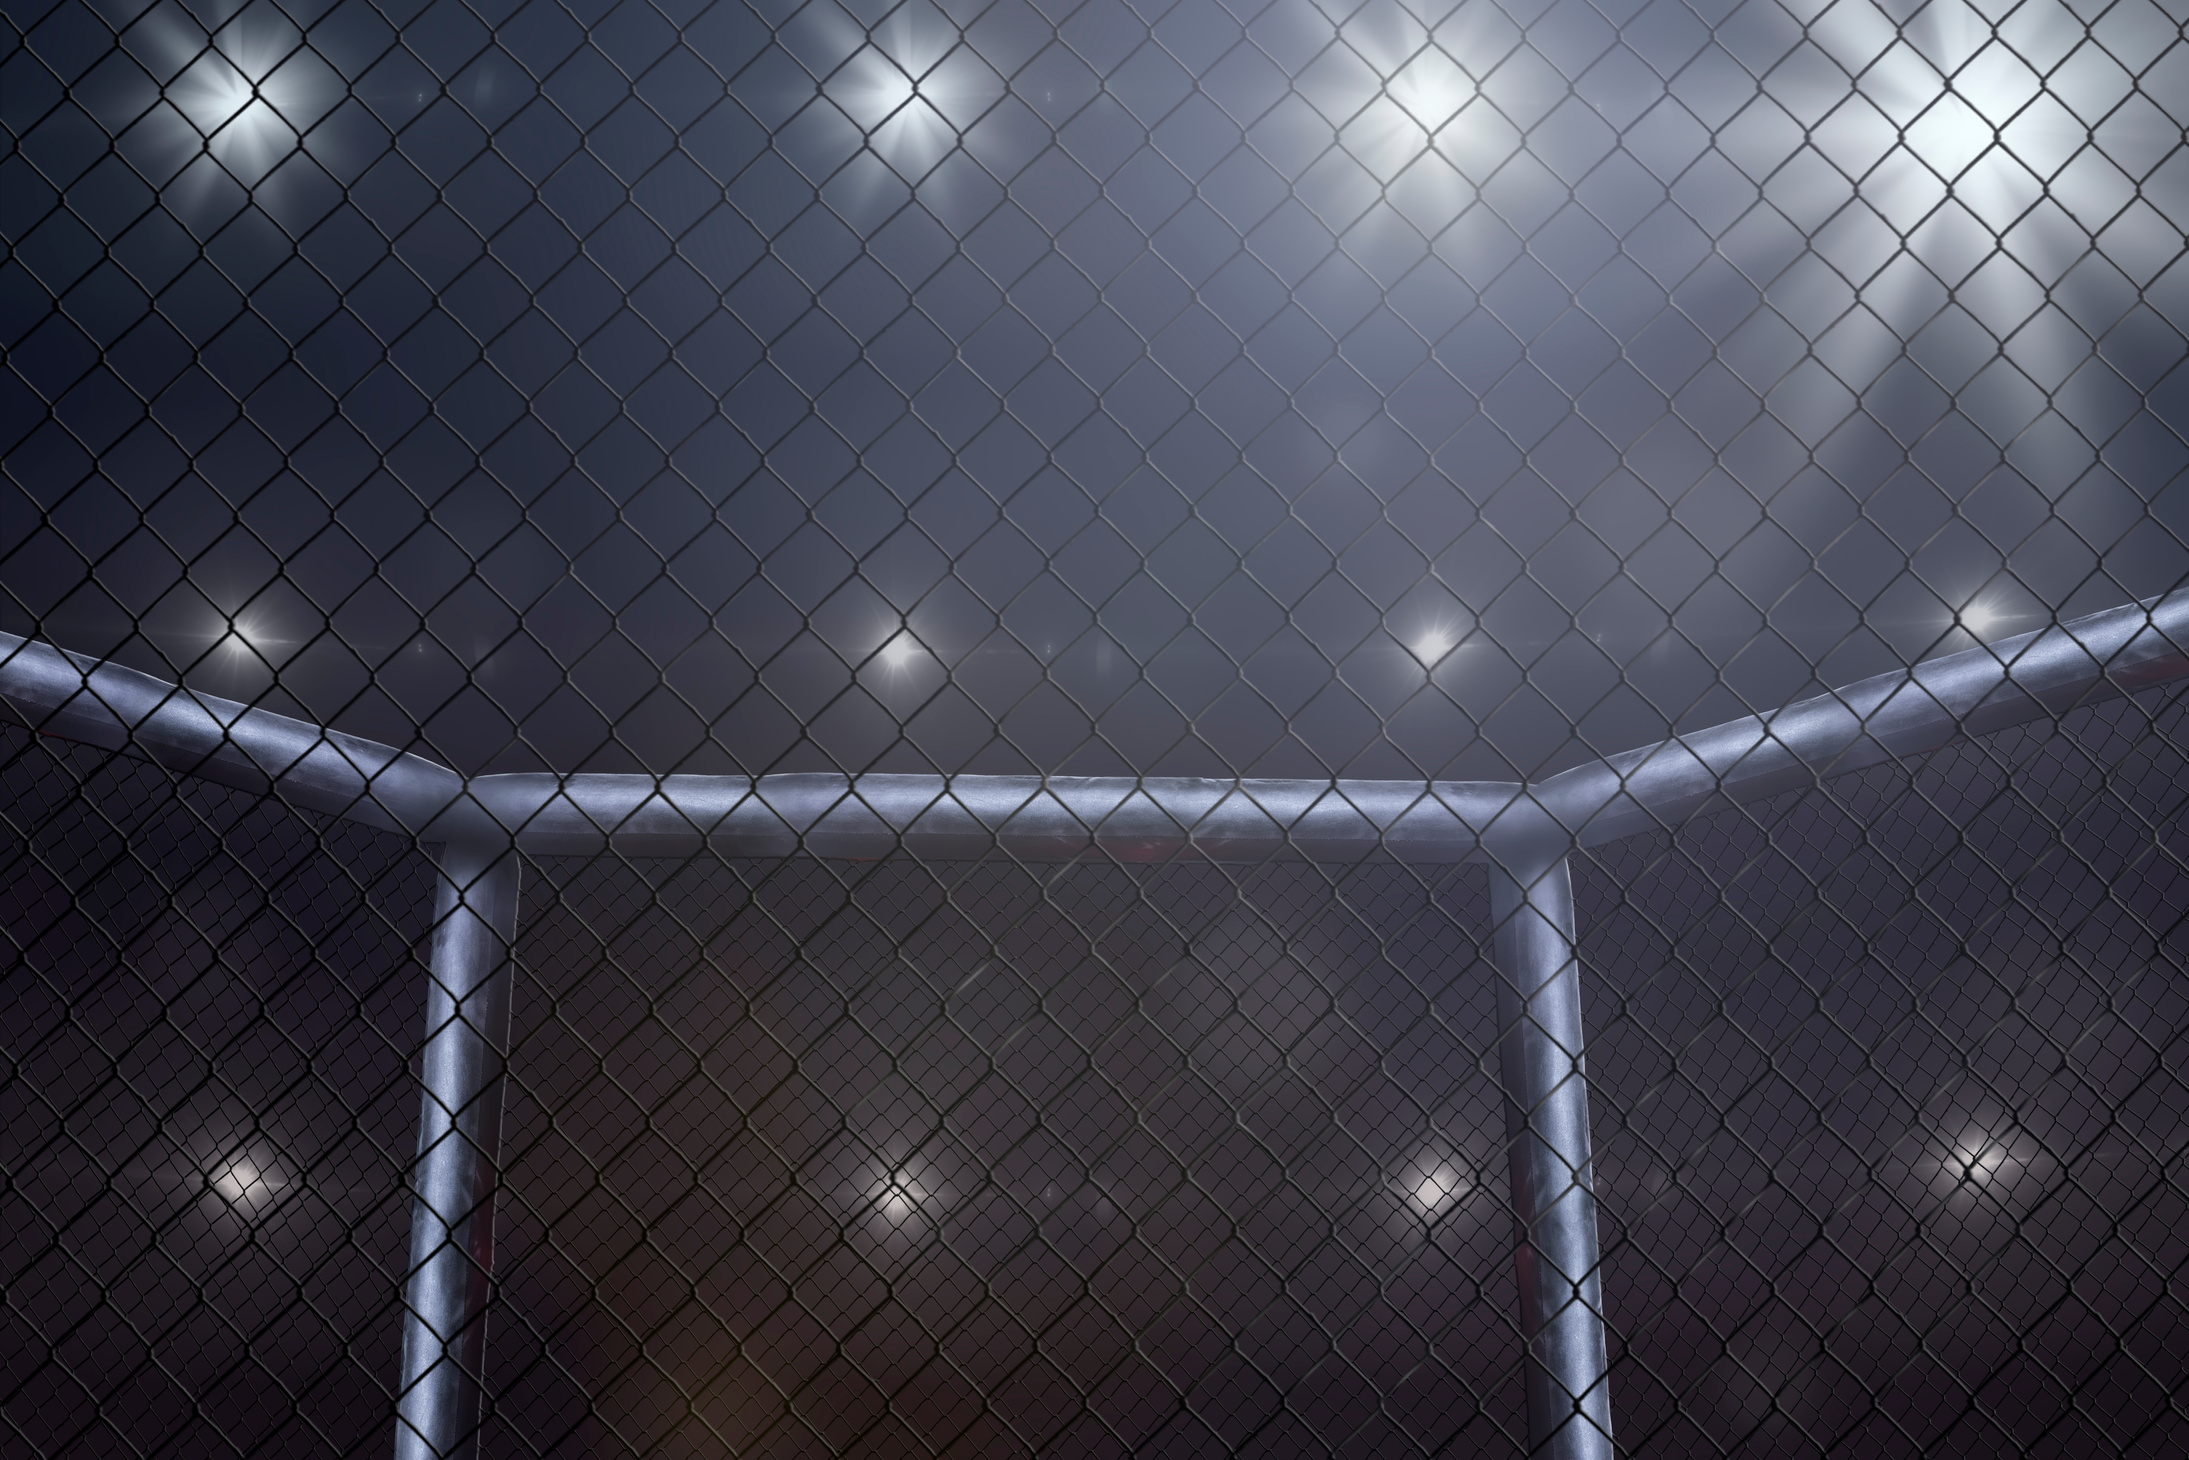 MMA fighting stage side view under lights. Not blurred.